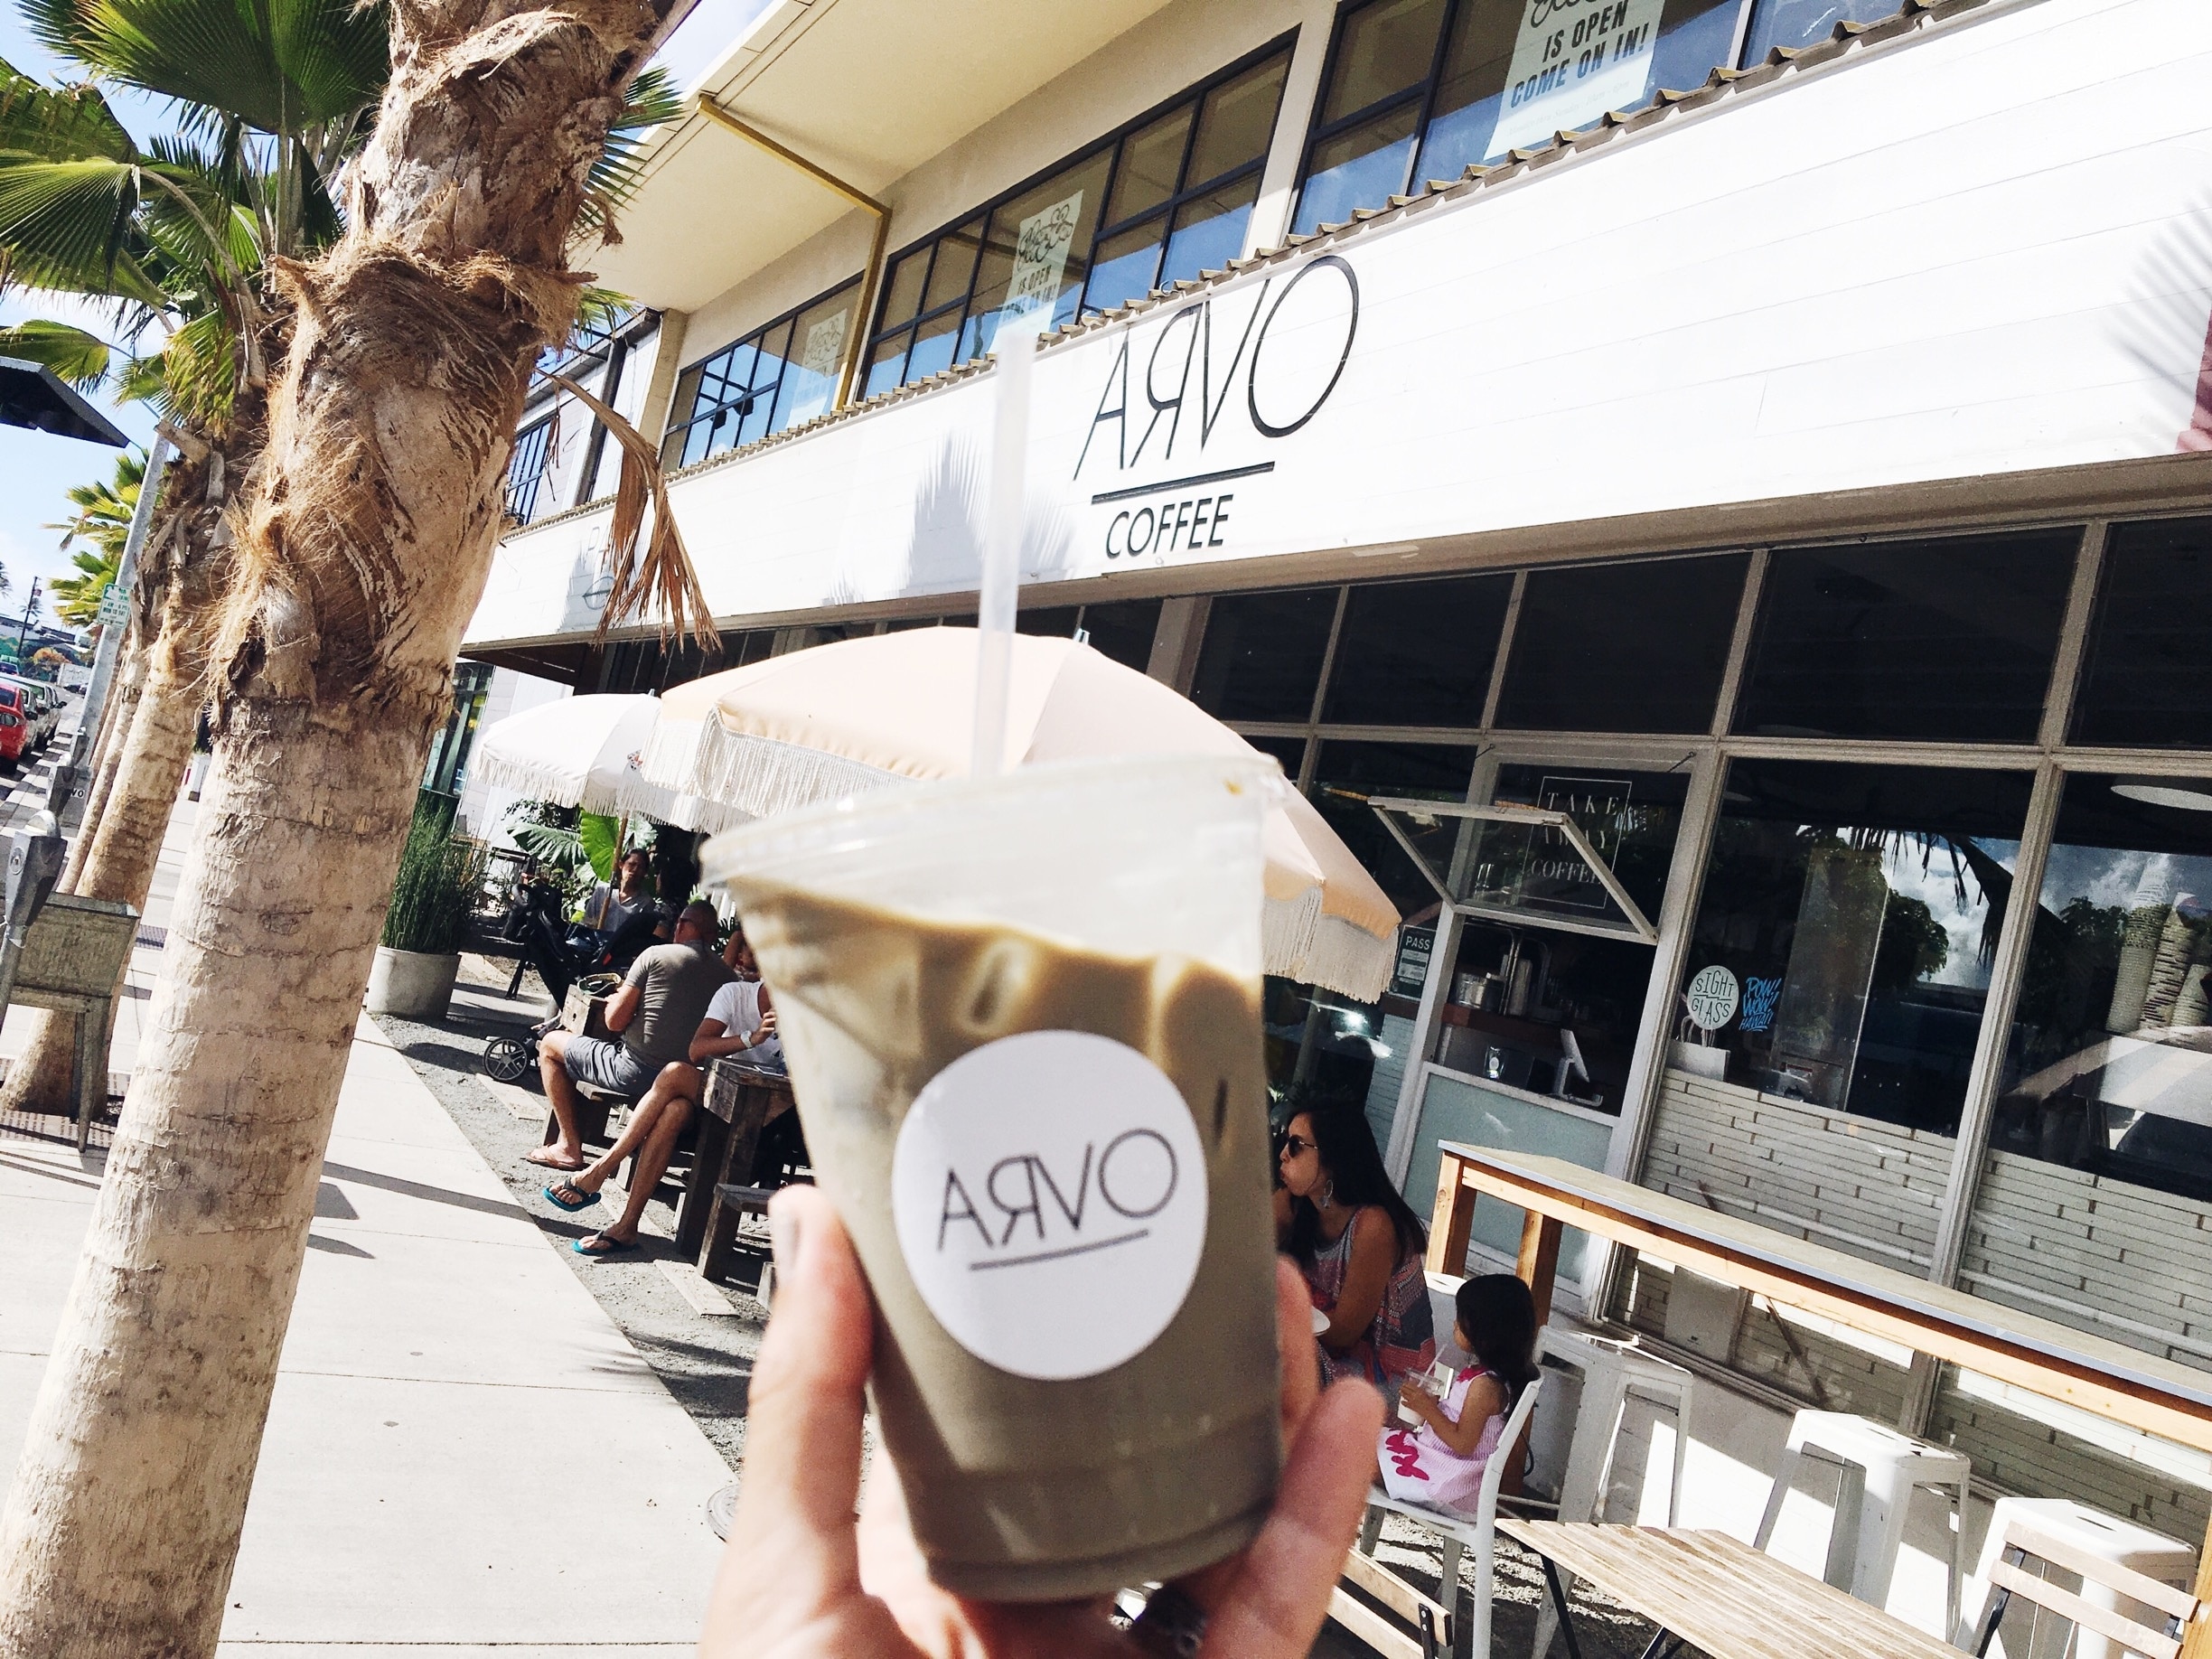 There are so many cute little coffee shops here in Hawaii, and arvo is one amazing breakfast & coffee shop! 